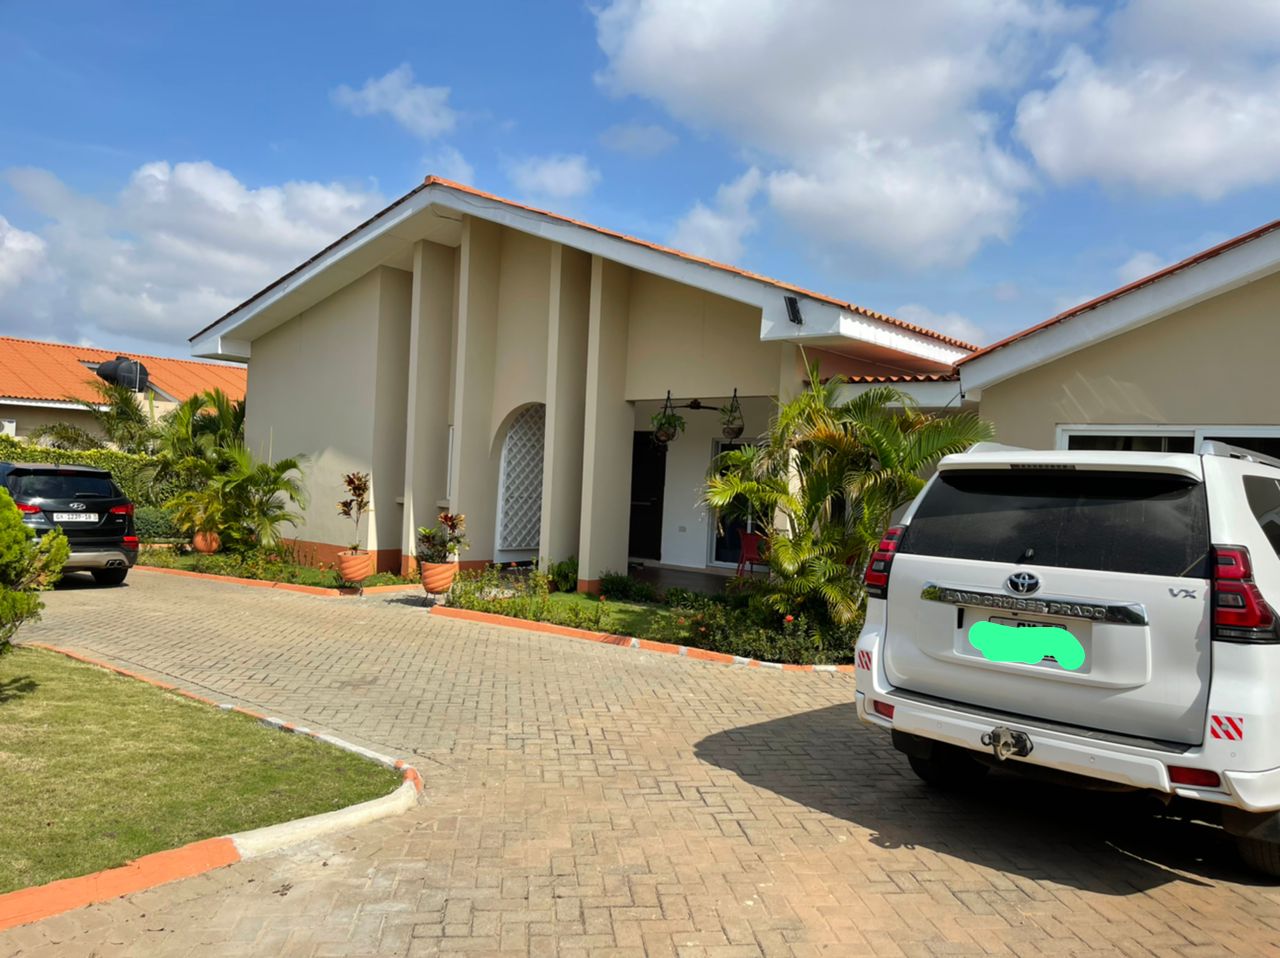 4 bedroom house for rent in Spintex.